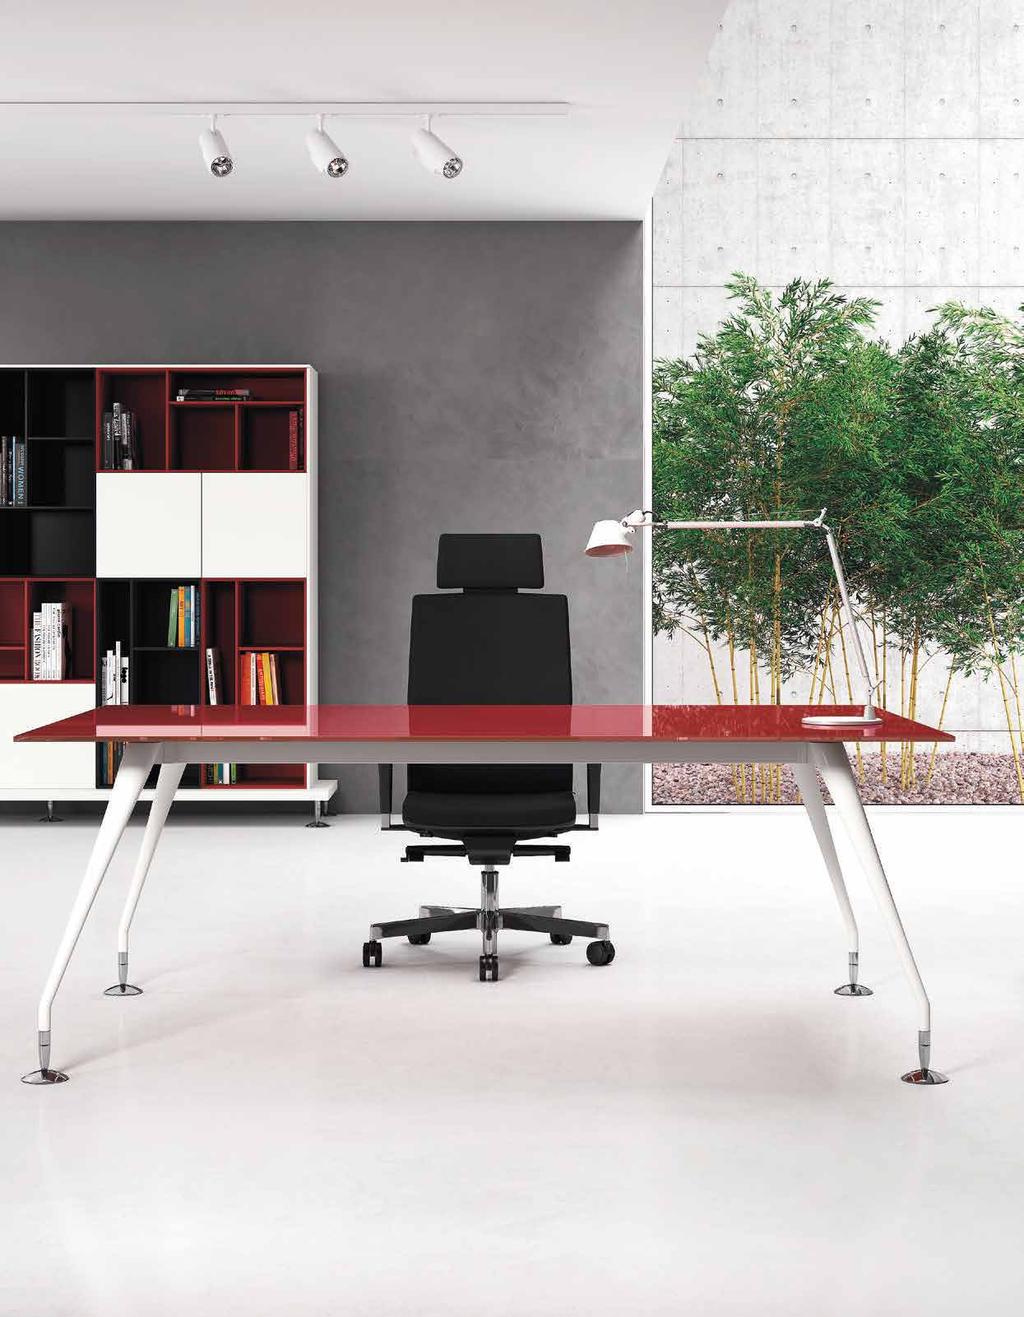 ENOSI is a modular executive line of office furniture which has been designed to facilitate and promote teamwork, where skills